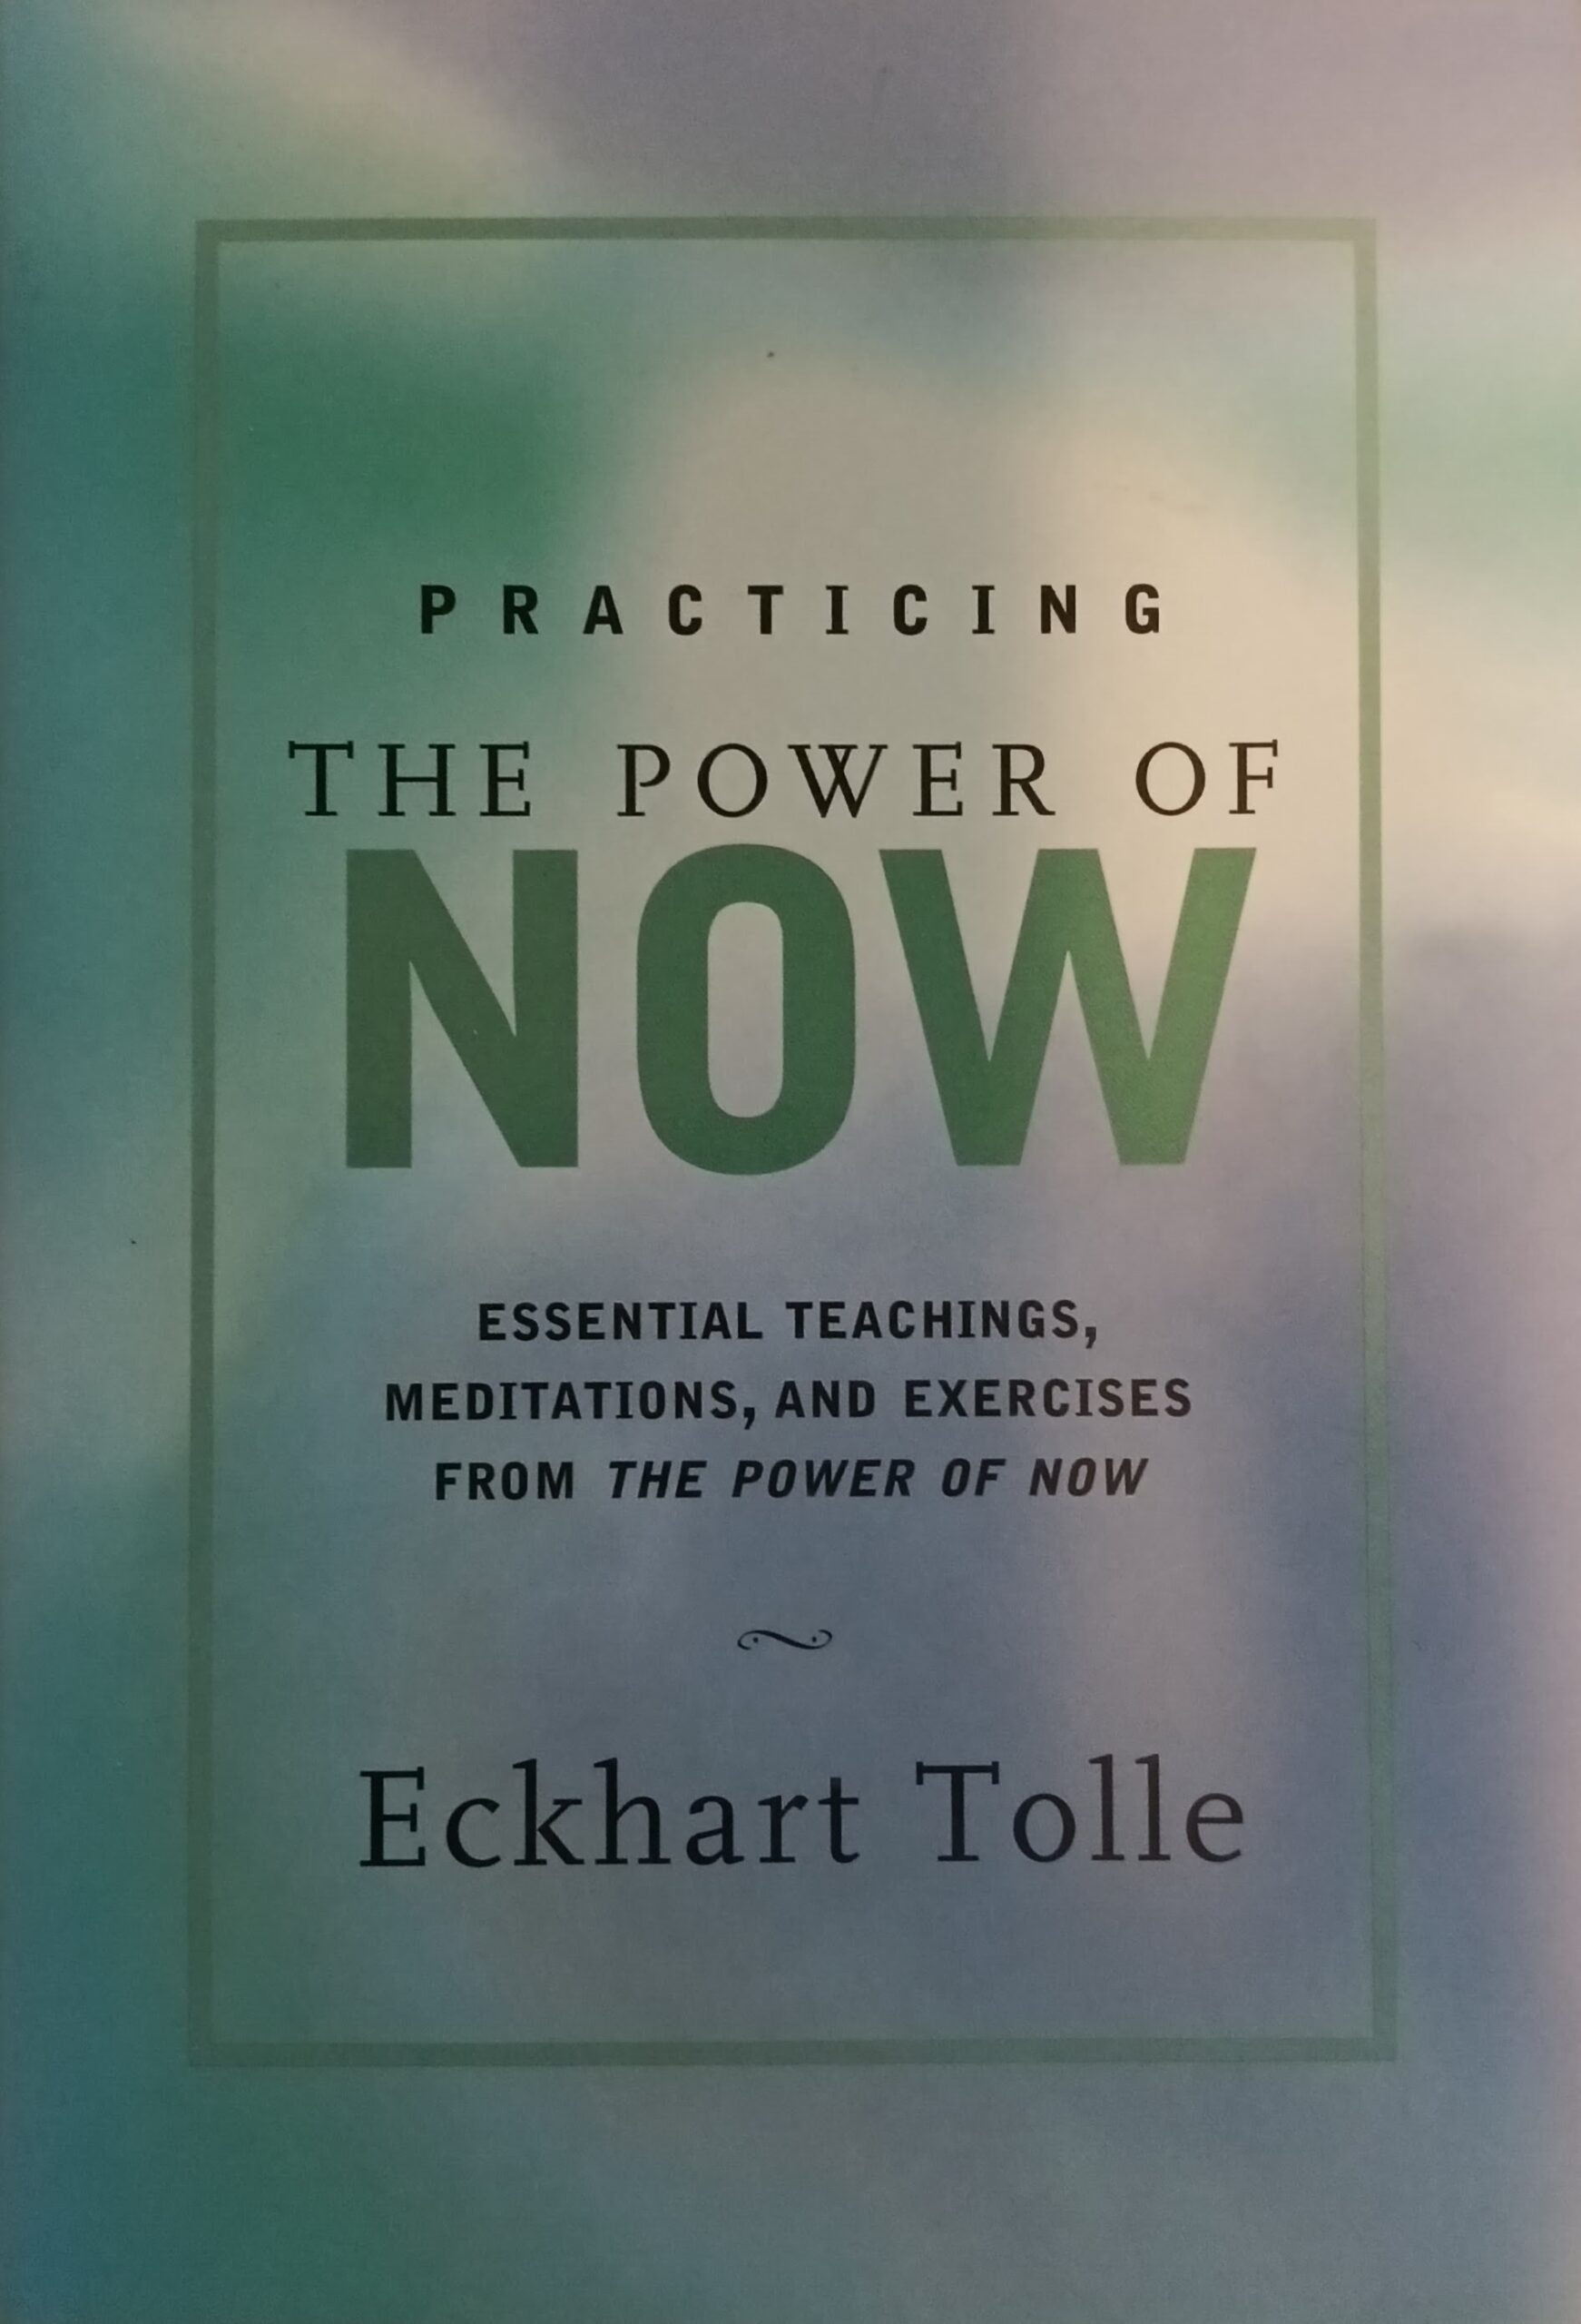 Practicing the Power of Now : Essential Teachings, Meditations, and Exercices From The Power of Now Eckhart Tolle